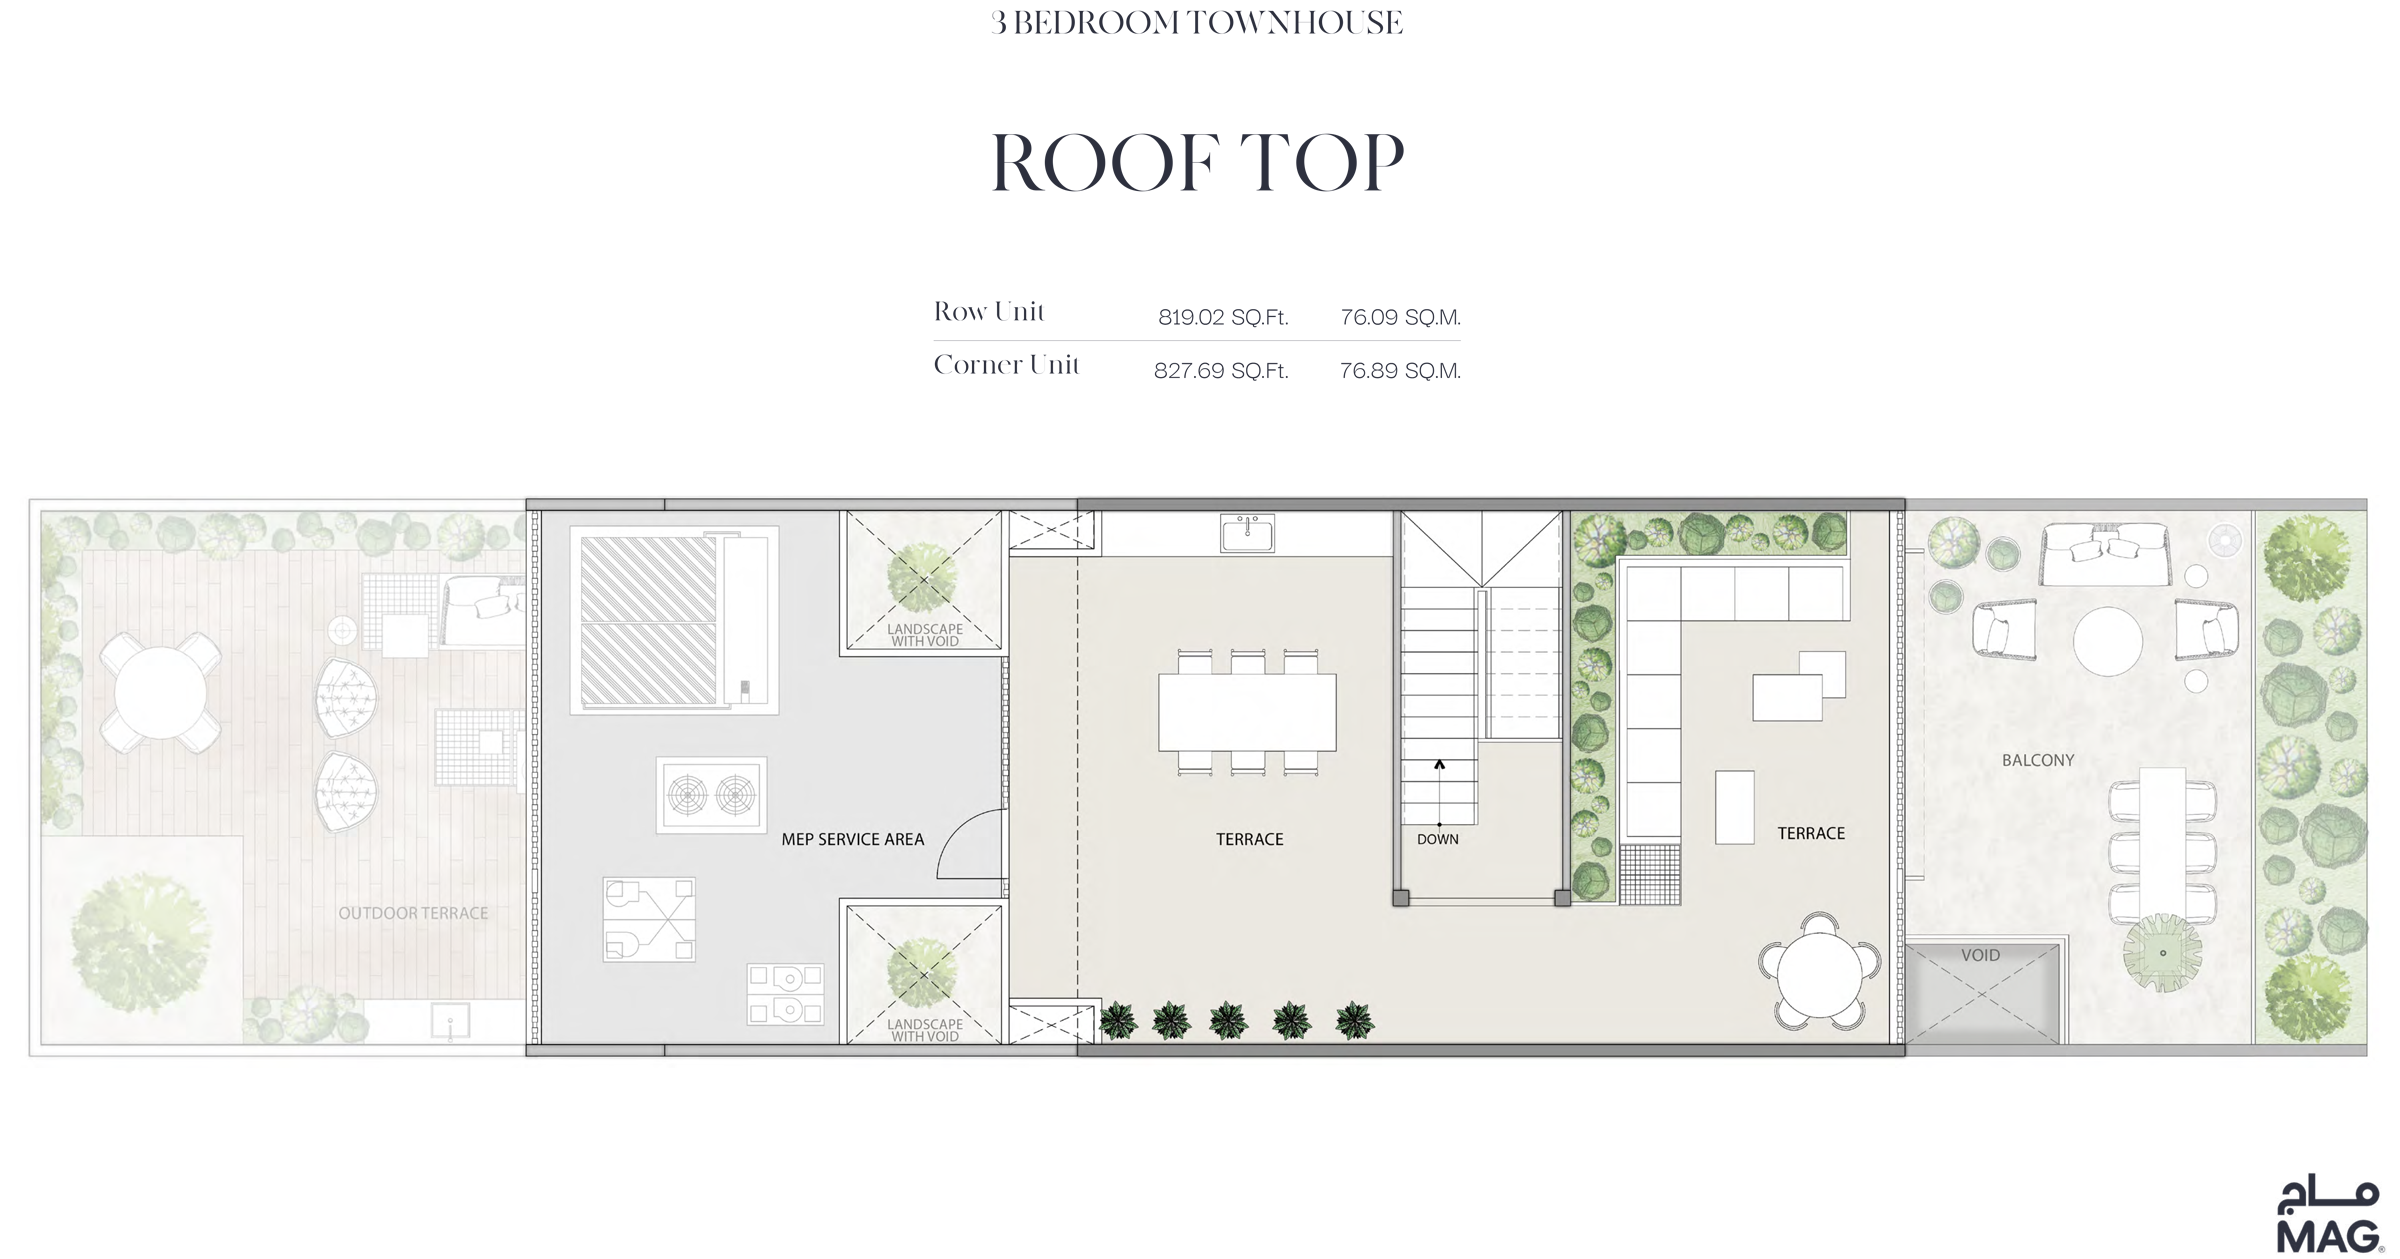 Roof Top, Row Unit